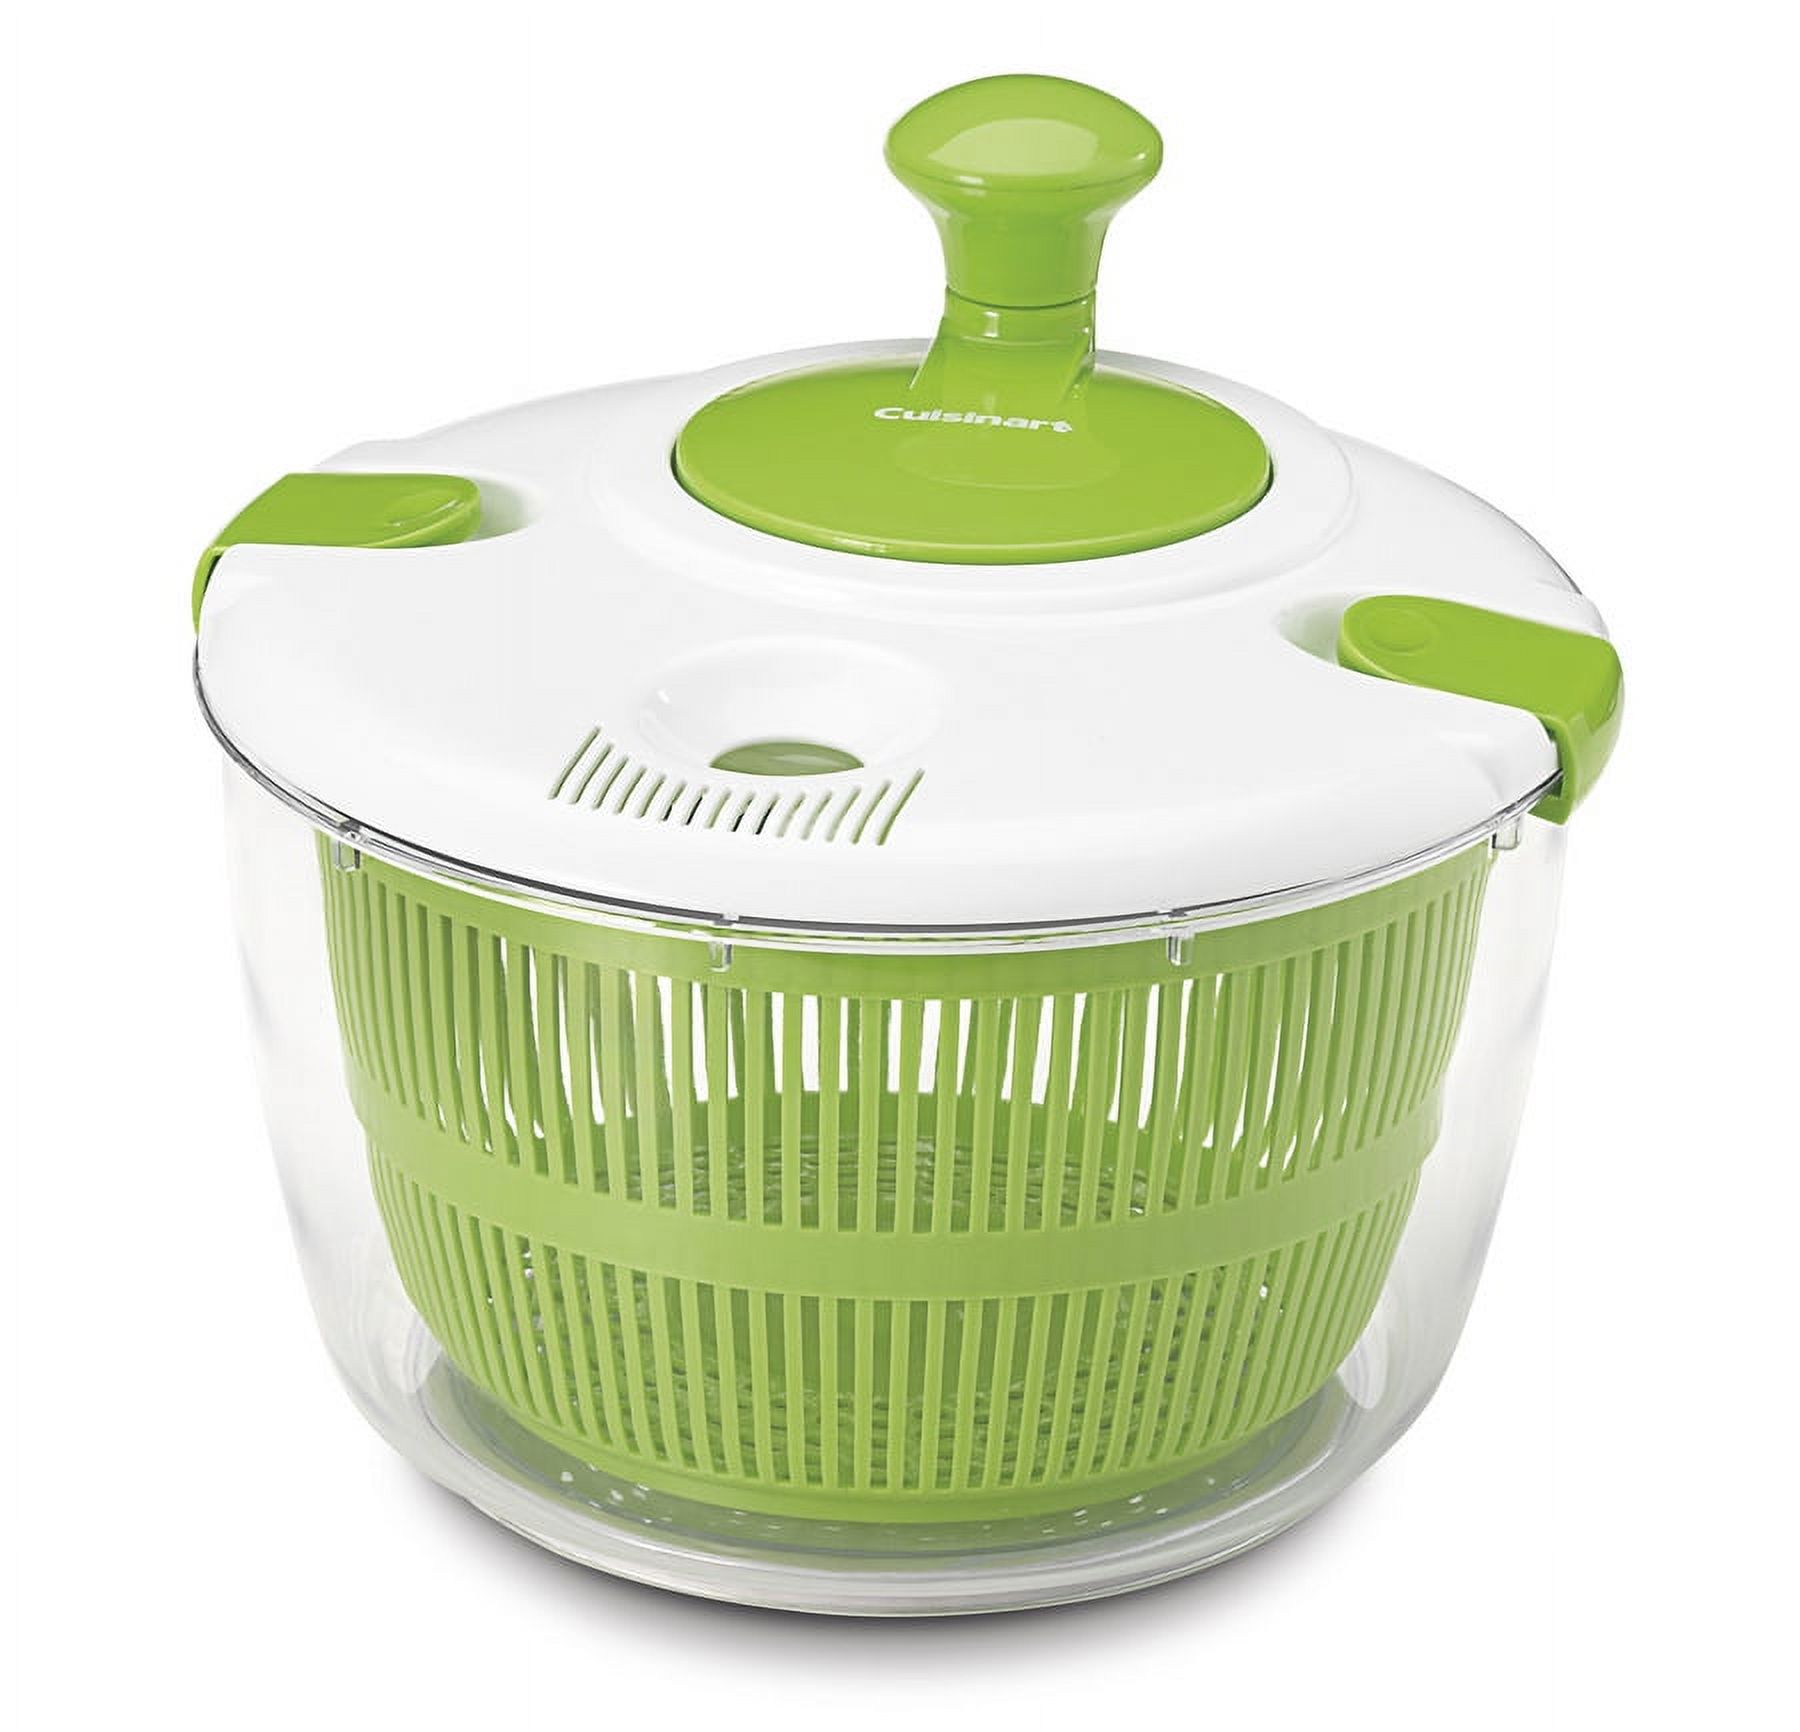 Cuisinart Non-Handled Salad Spinner - image 1 of 4